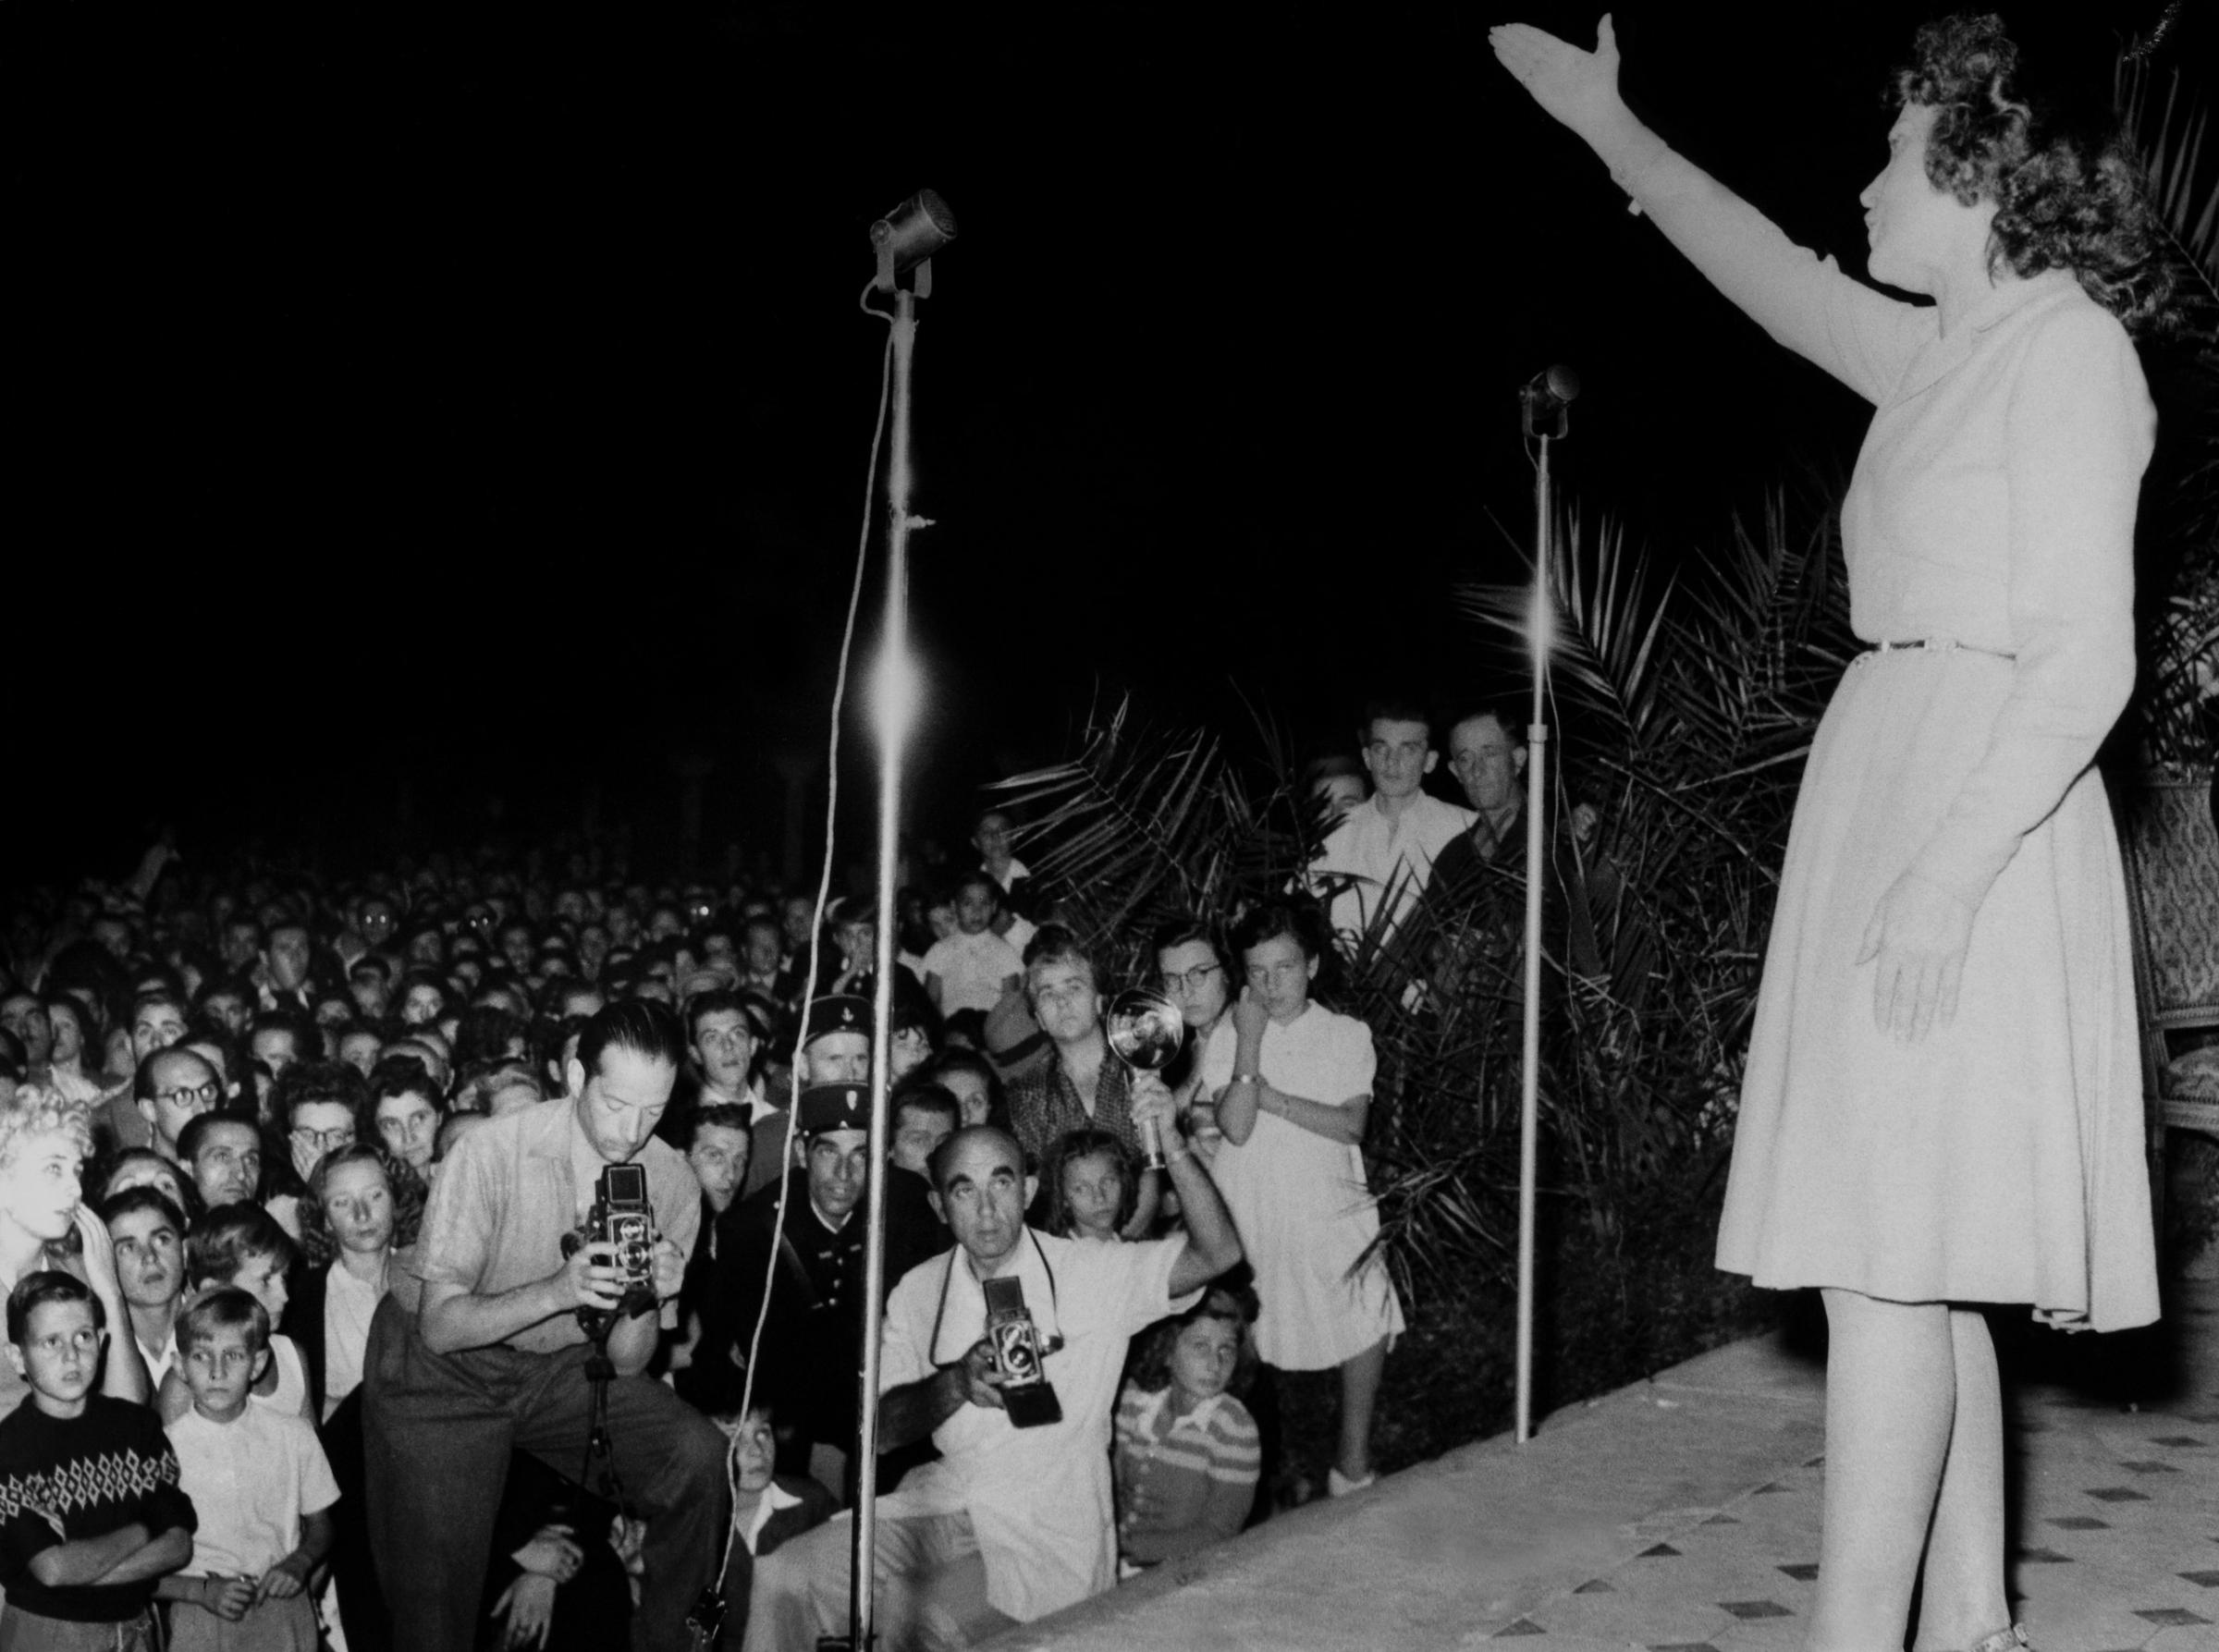 Edith Piaf on the Carlon Hotel's Terrace at the first Cannes Film Festival in Cannes, France In 1946.